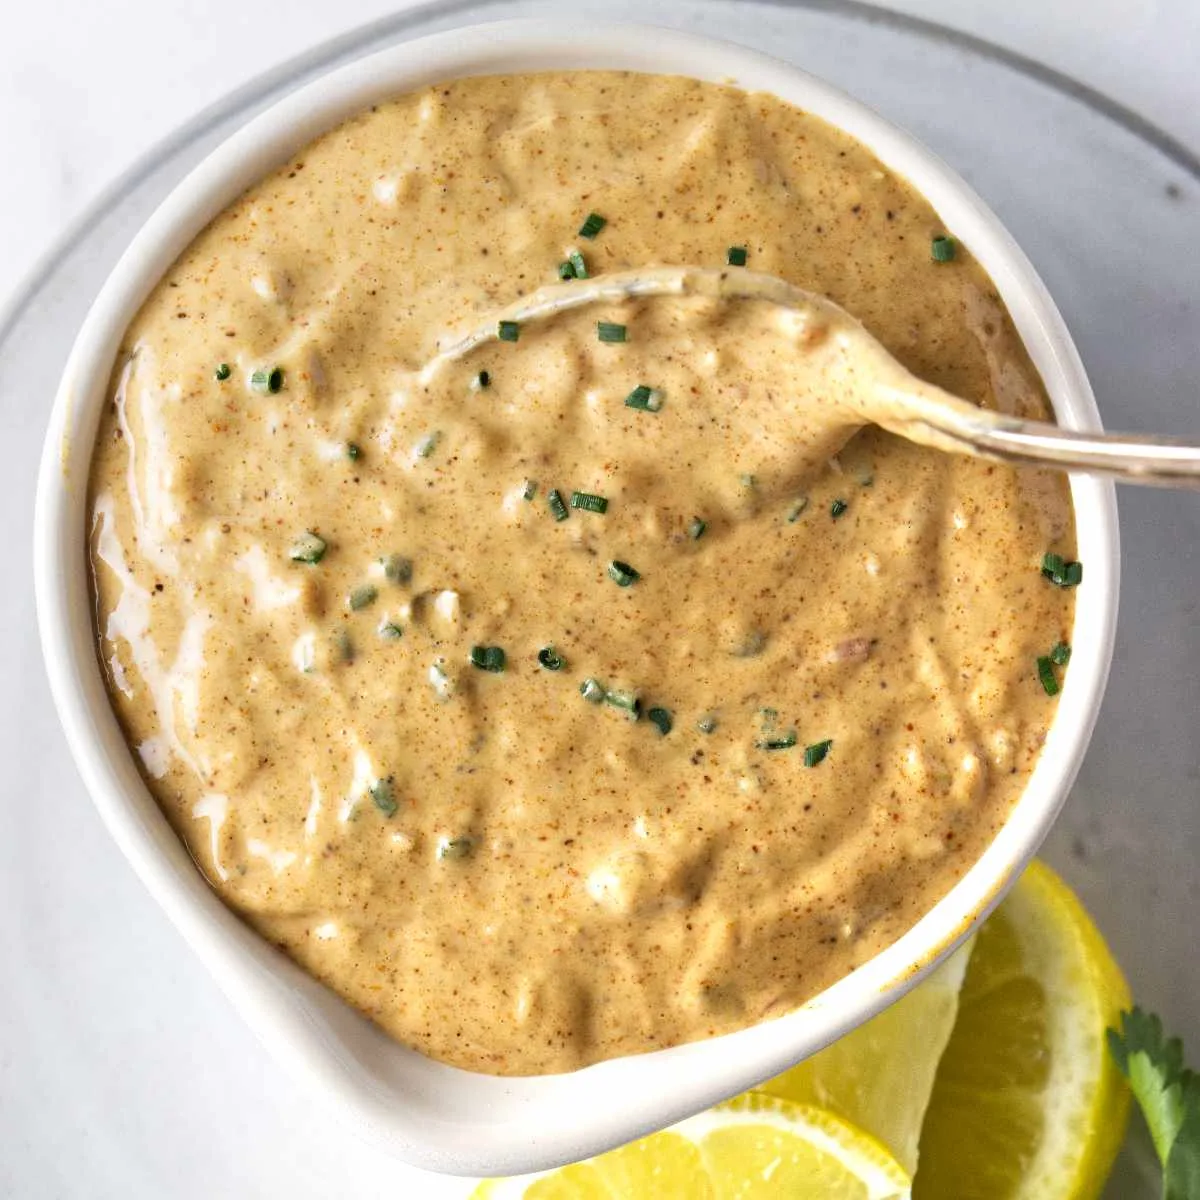 Creamy remoulade sauce in a dish with a spoon.